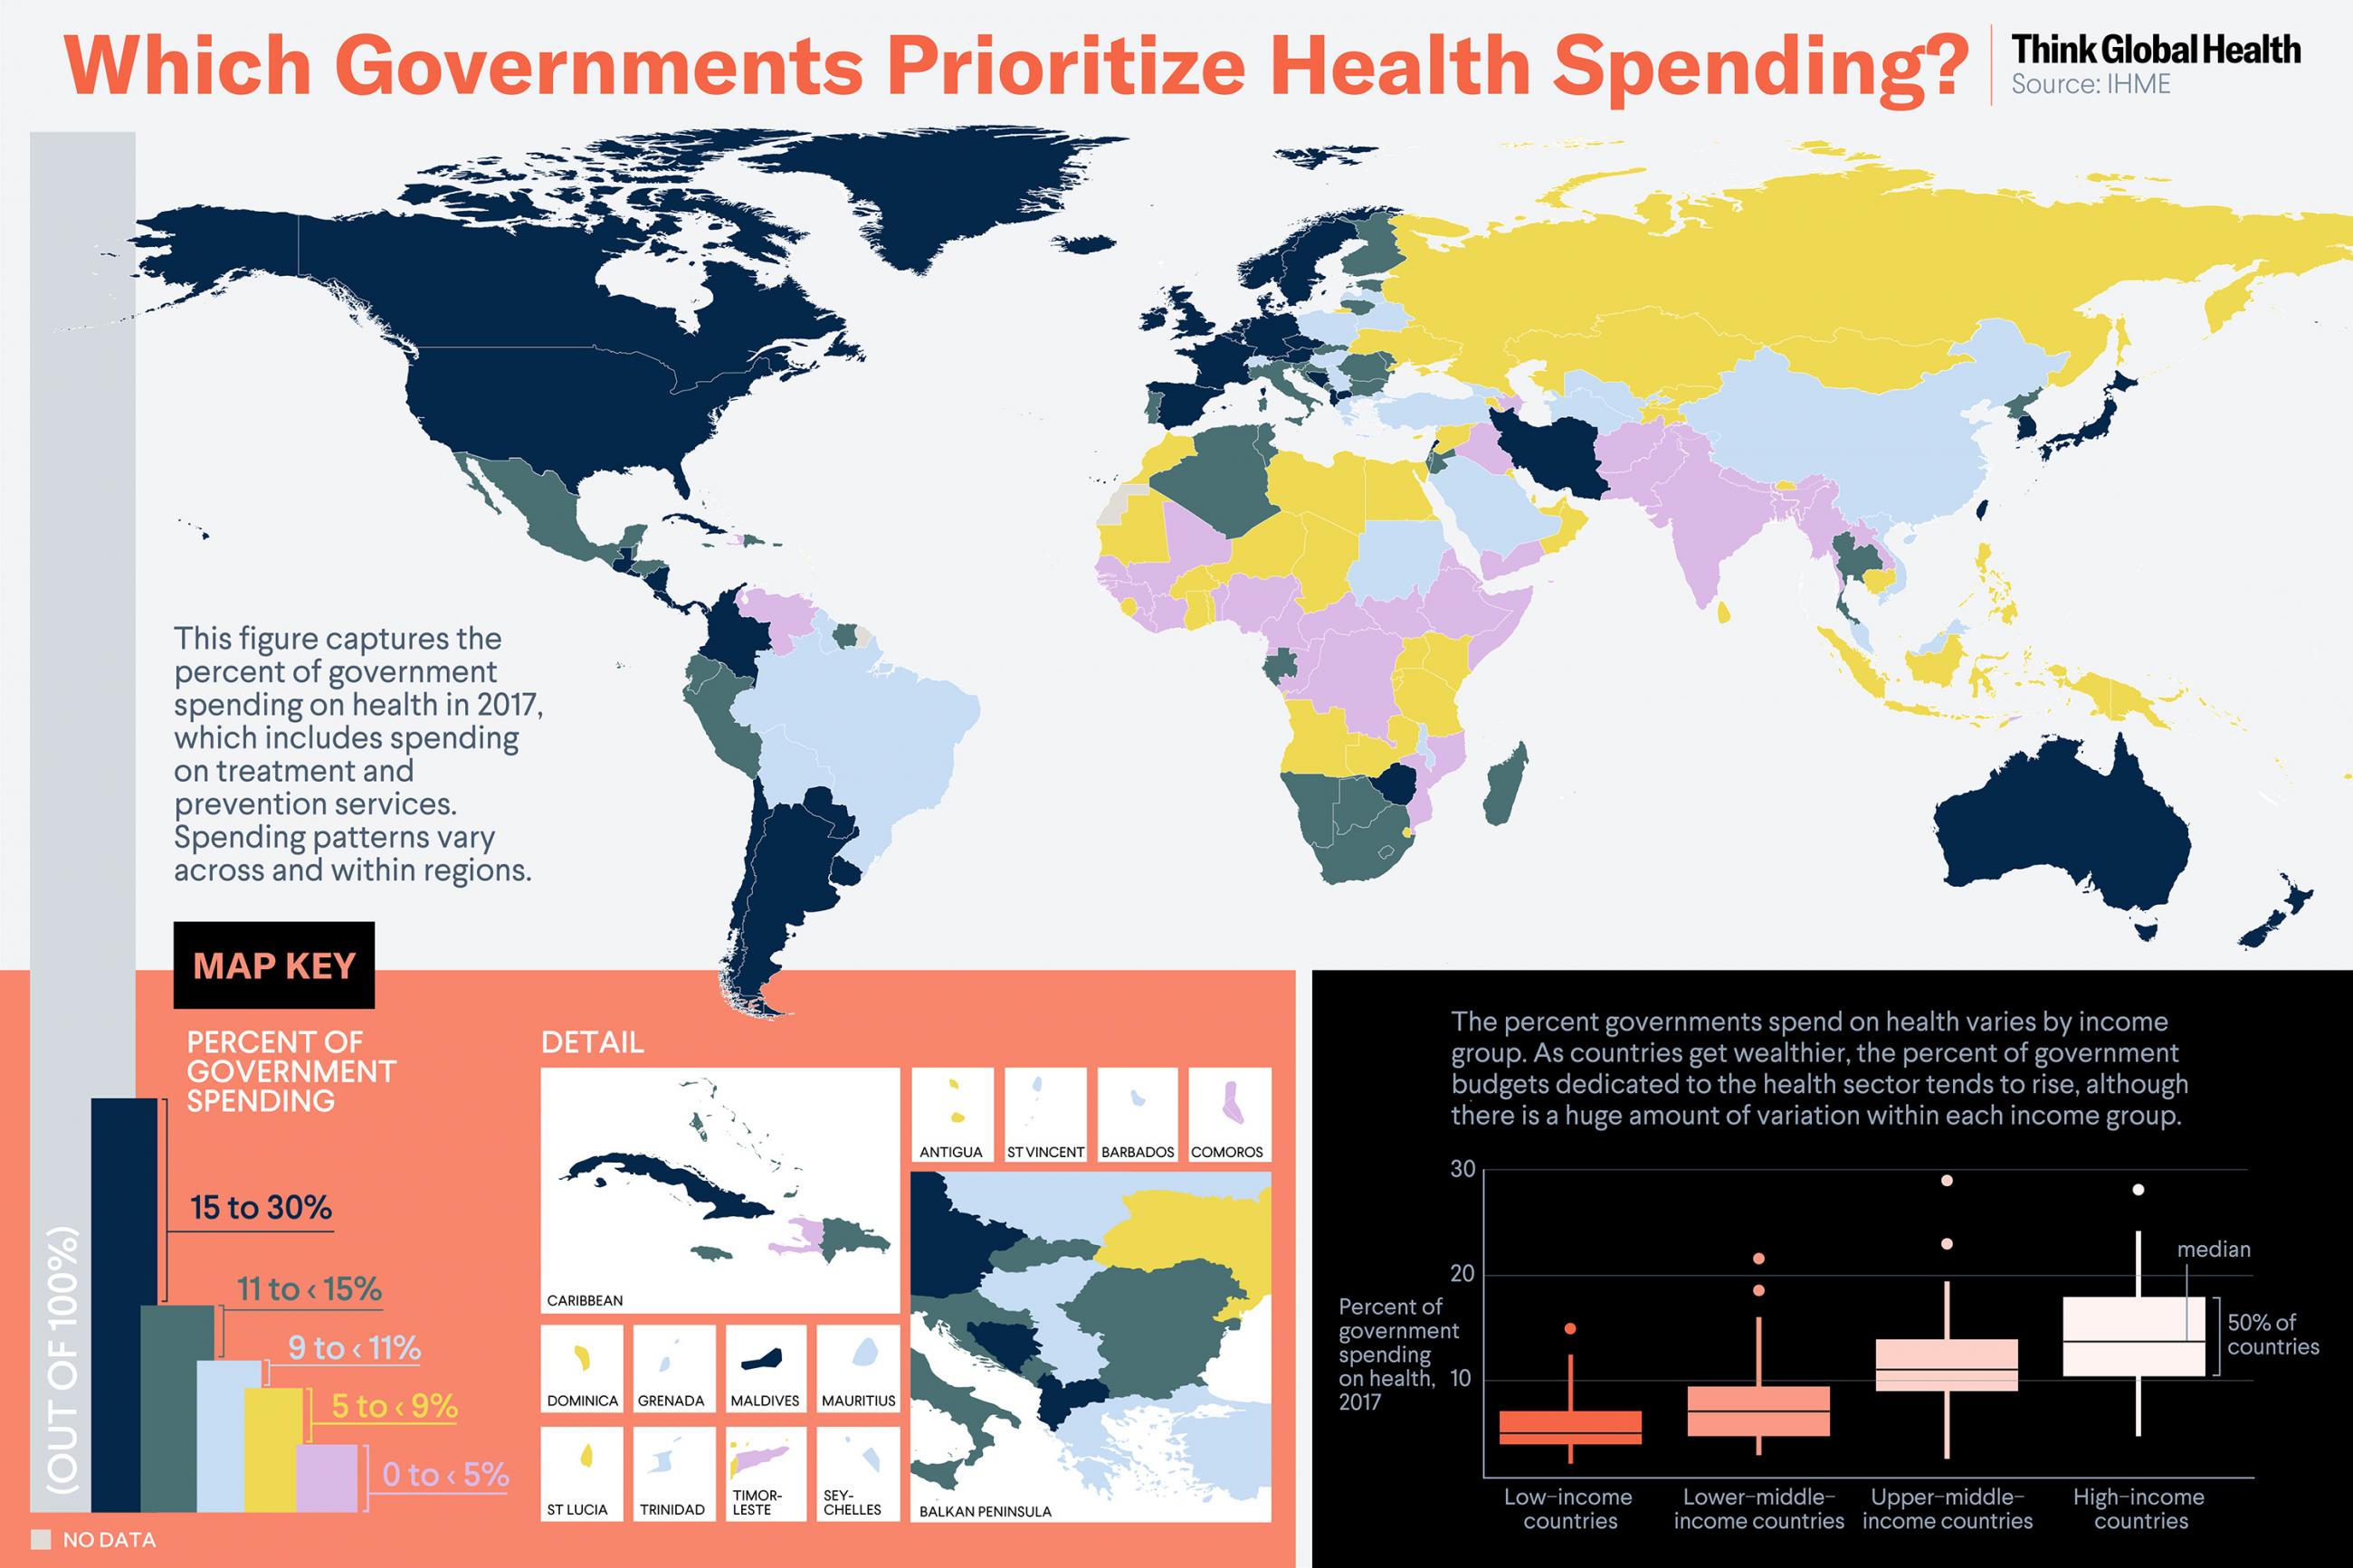 Image shows a map of the world color coded according to percent of government spending on health in 2017. 